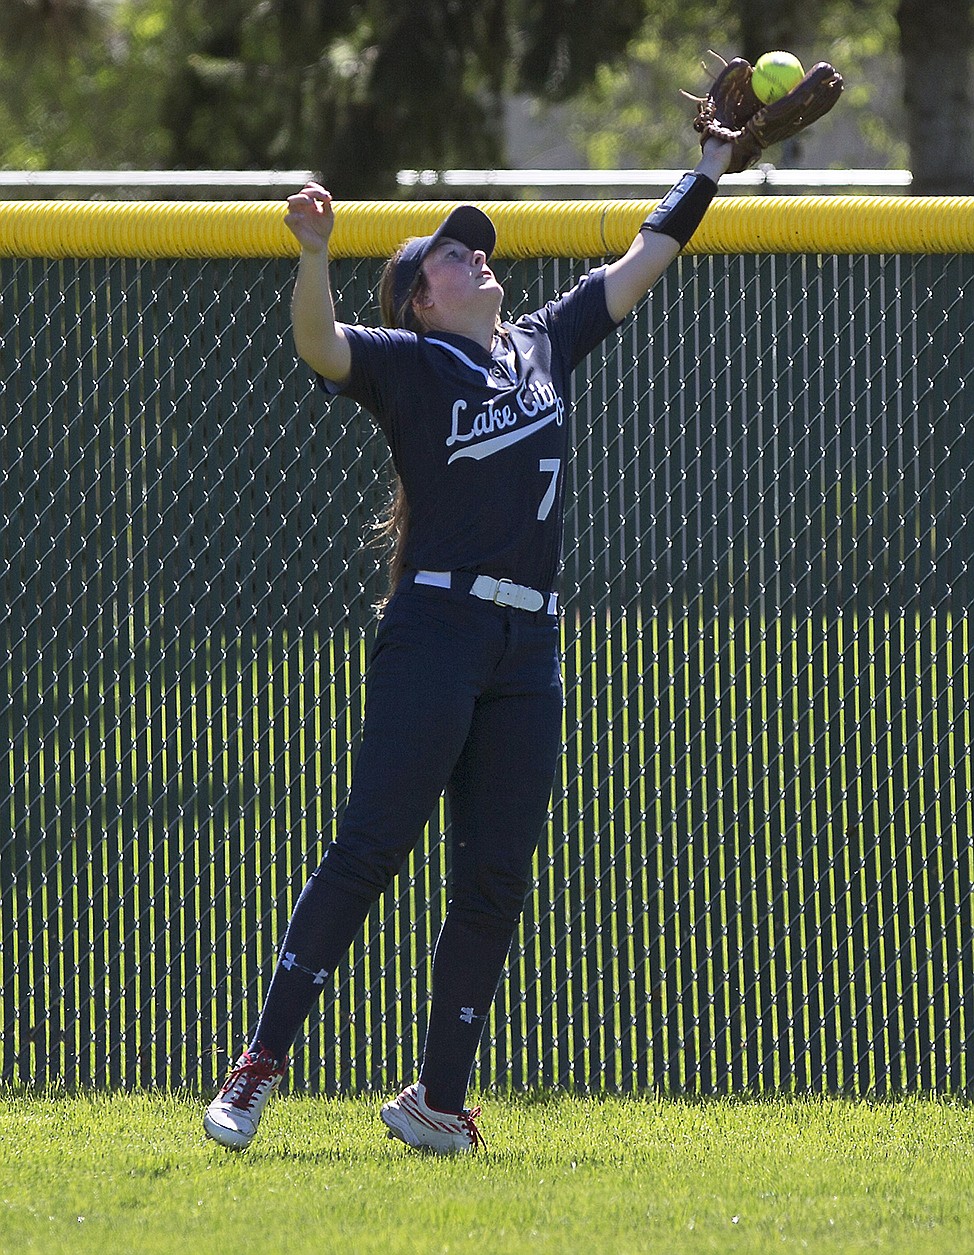 LISA JAMES/Press
Center fielder Emma Gray of Lake City catches a fly ball late in their first game of the 5A state softball championship against Eagle at Coeur d&#146;Alene High School on Sunday. Lake City began and ended the day with a loss to Eagle to claim second place.